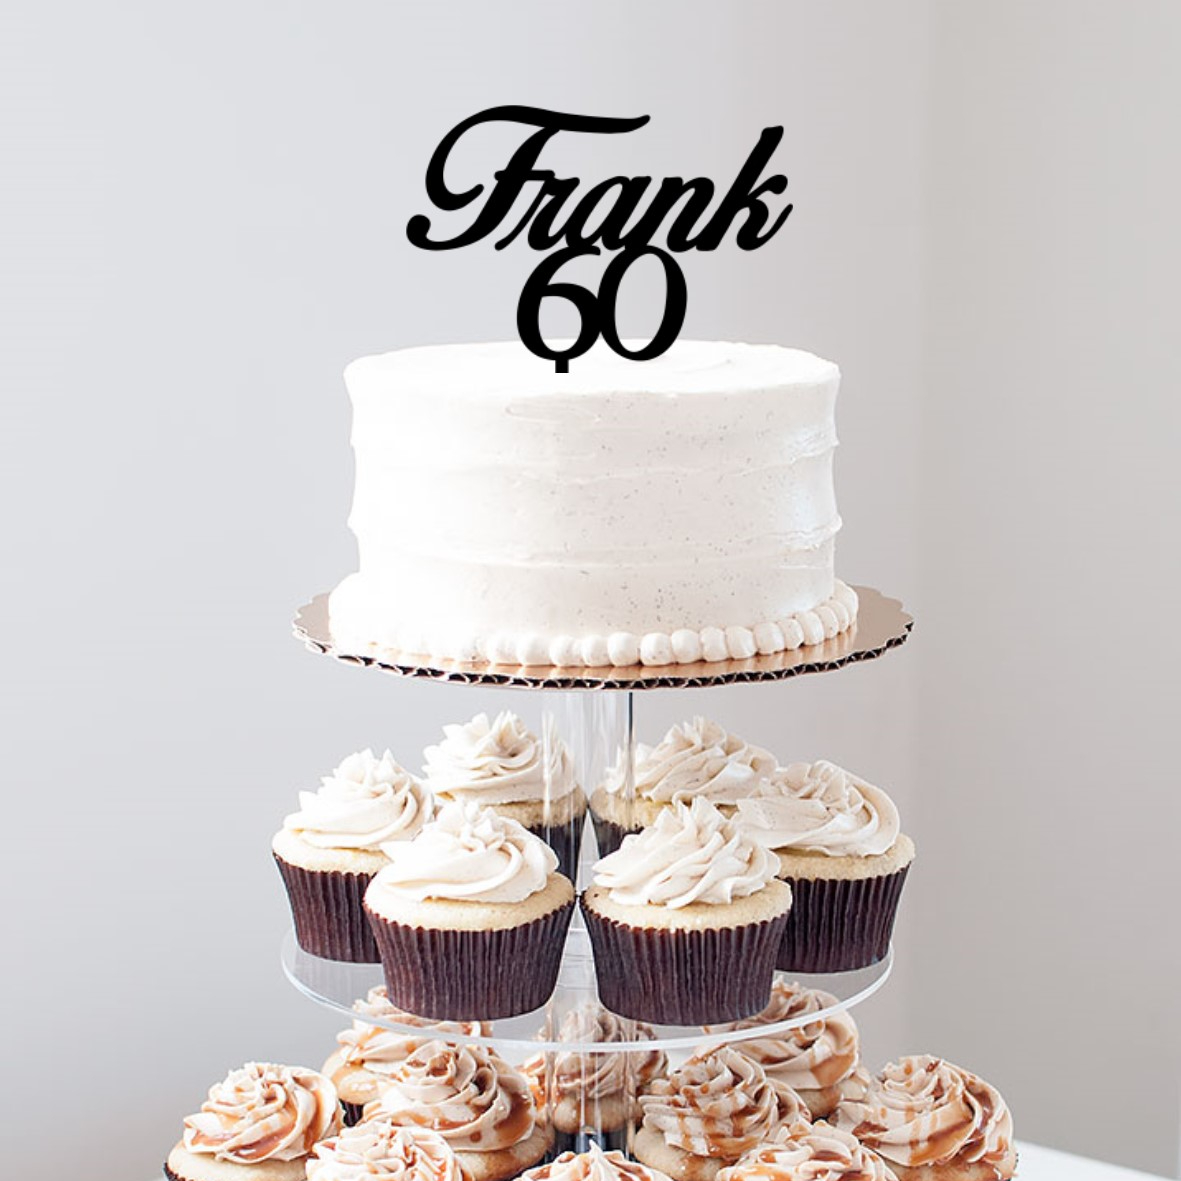 Quick Creations Cake Topper - Frank 60